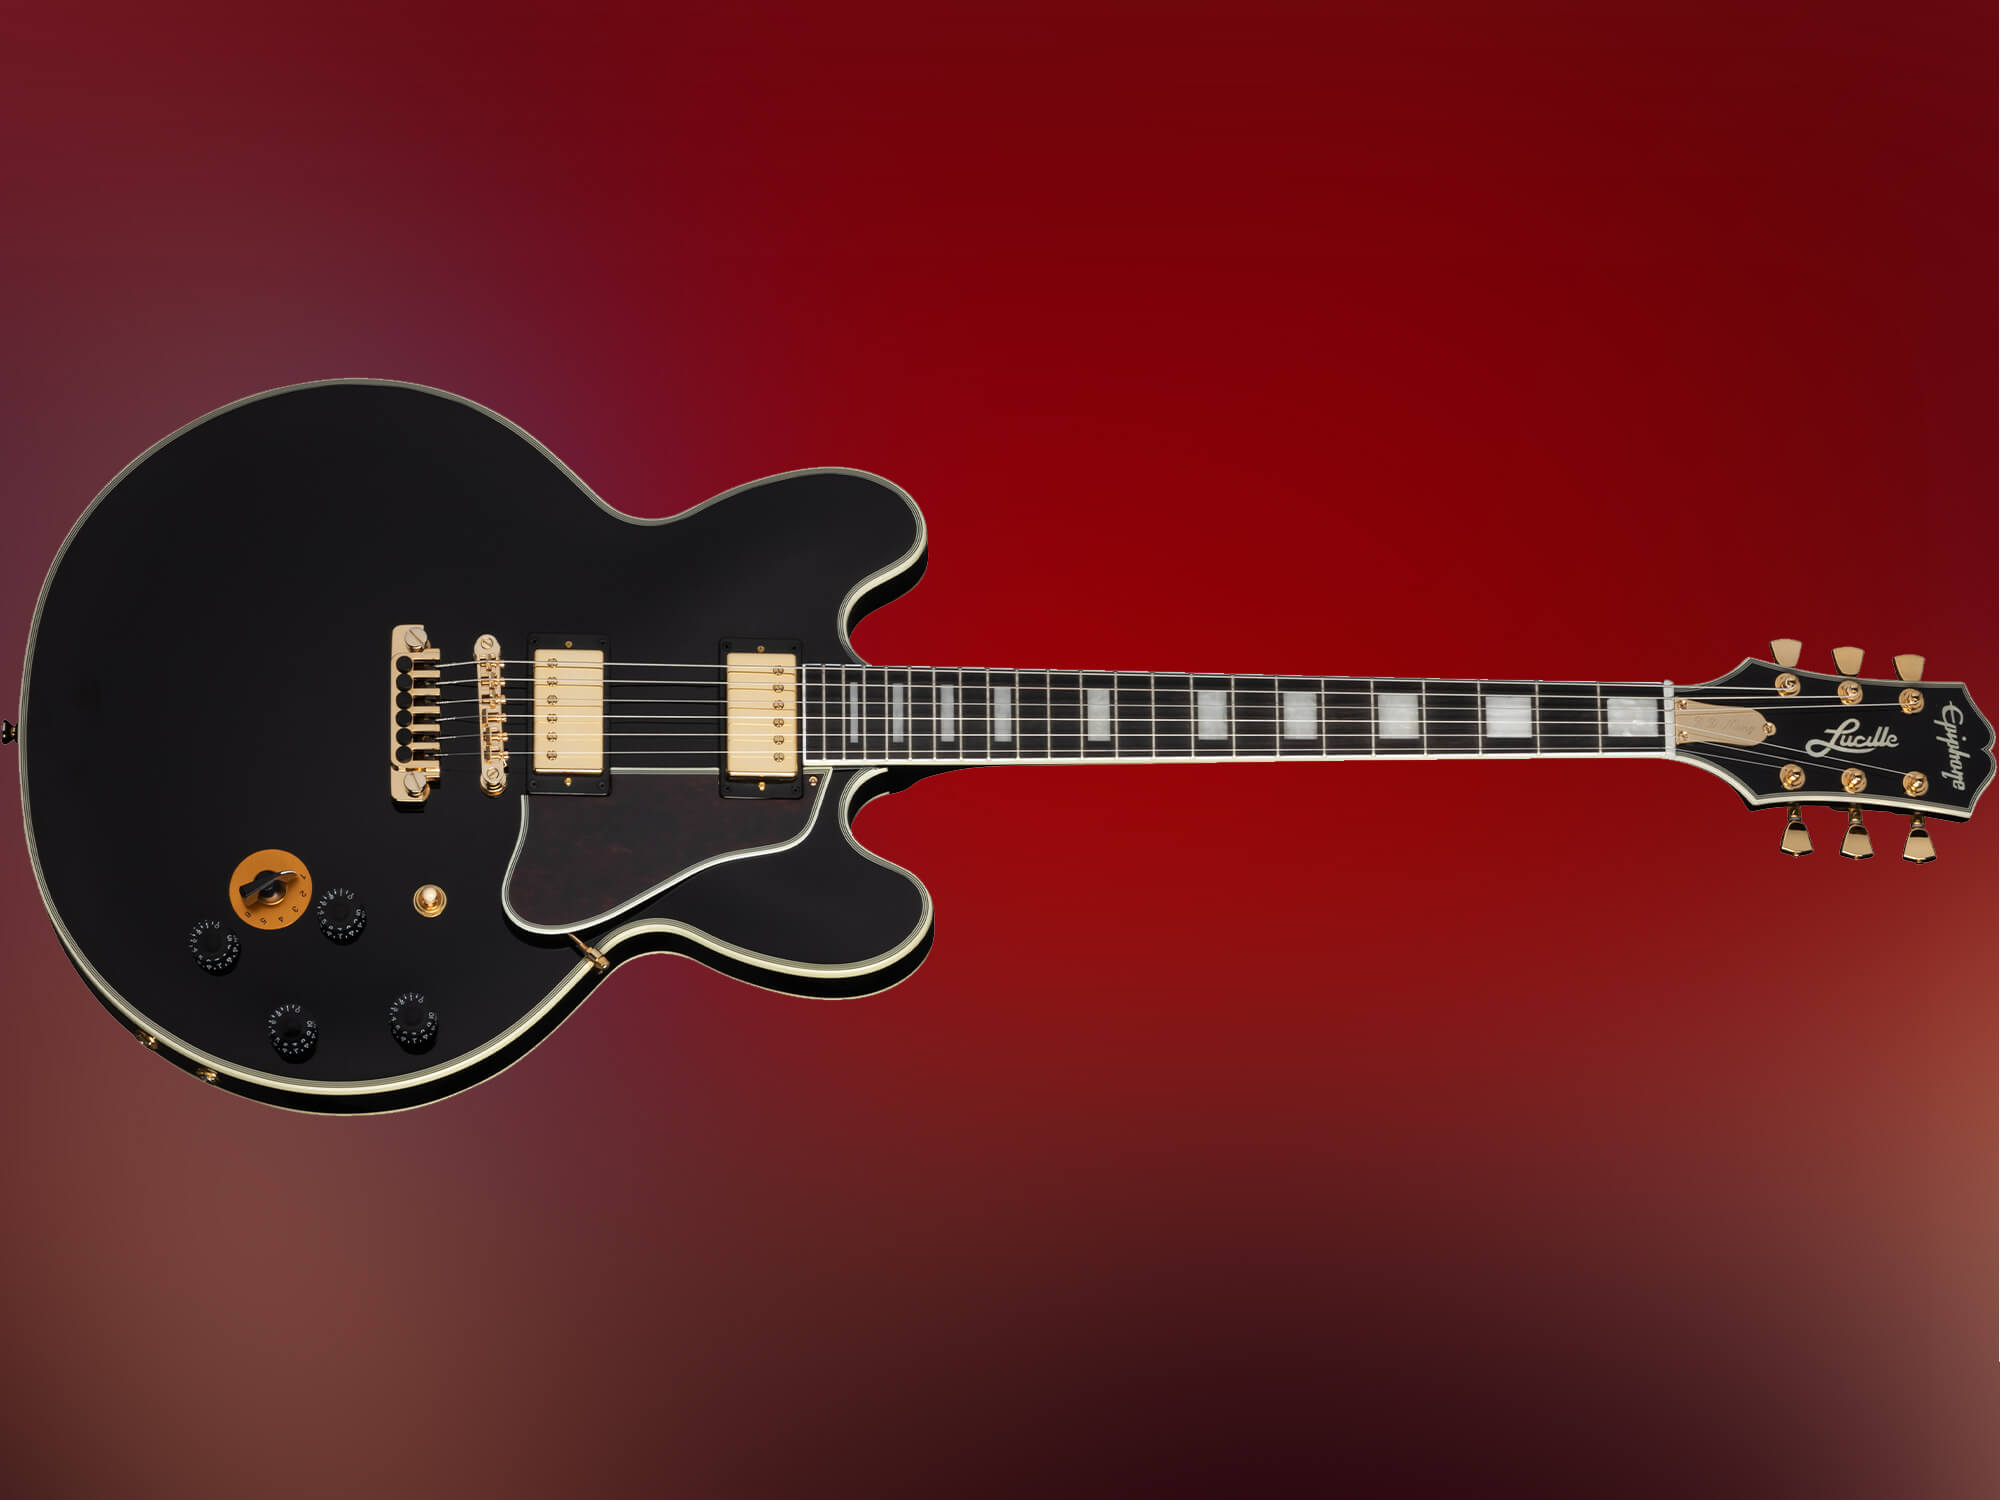 Epiphone's BB King Lucille is a tribute to the ES models played by